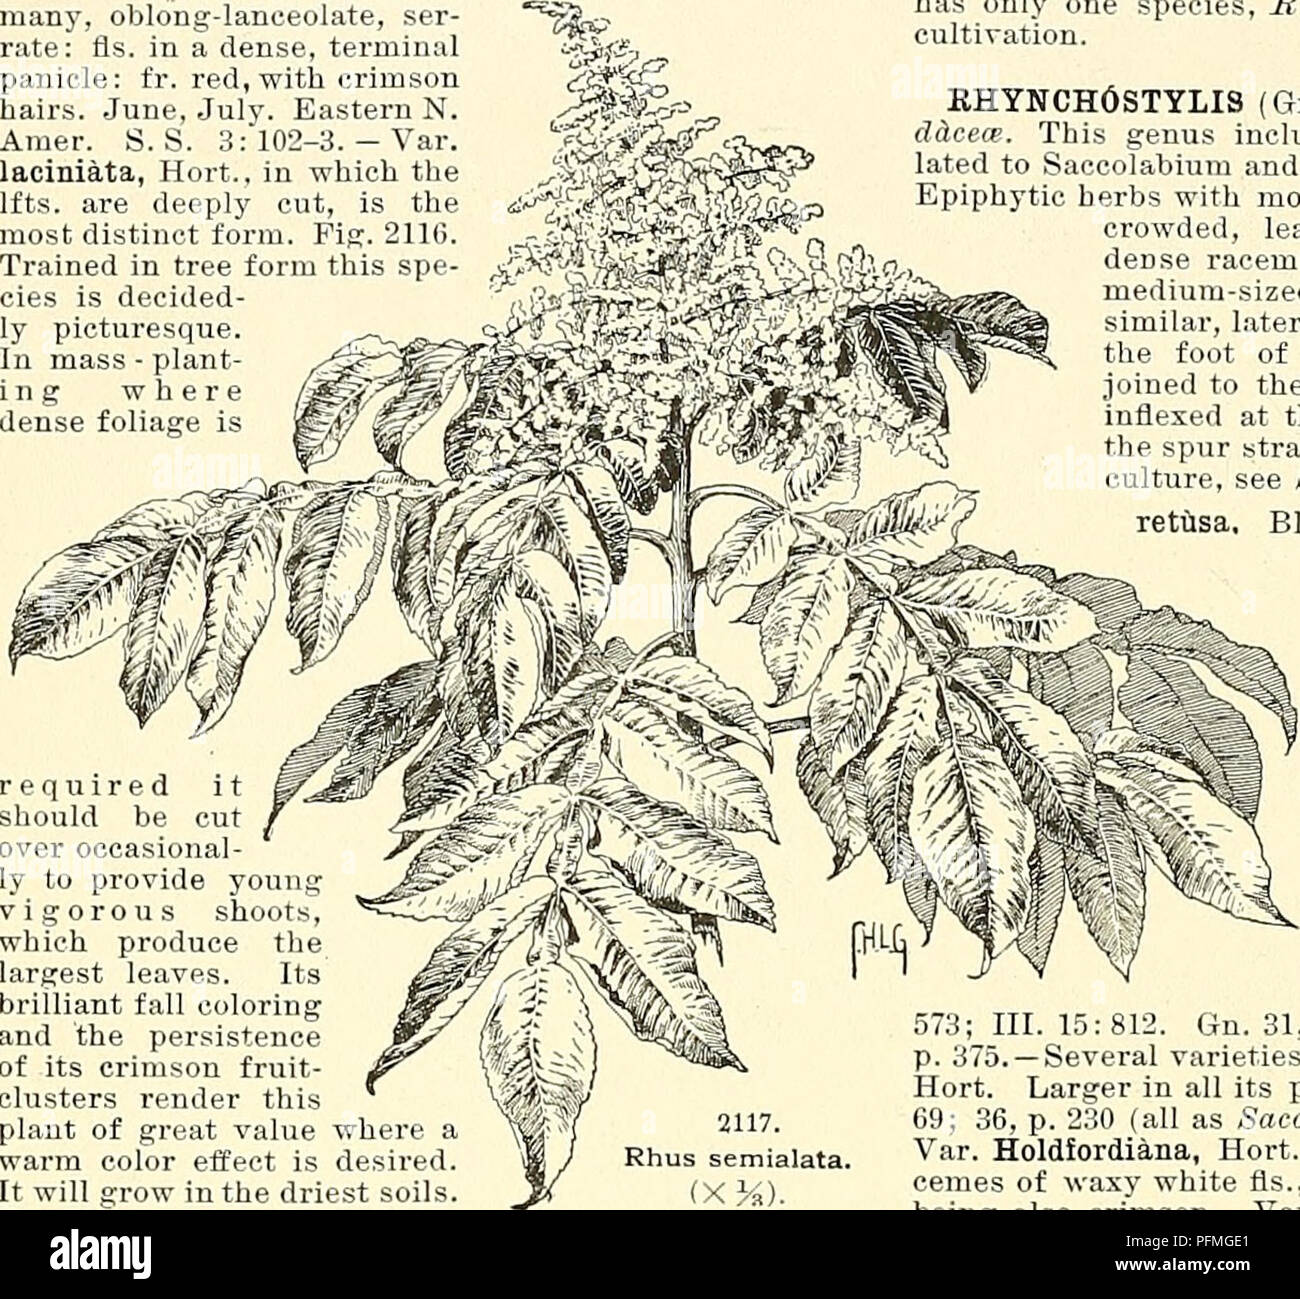 . Cyclopedia of American horticulture, comprising suggestions for cultivation of horticultural plants, descriptions of the species of fruits, vegetables, flowers, and ornamental plants sold in the United States and Canada, together with geographical and biographical sketches. Gardening. 1530 RHUS RIBES the most poisonous of the Sumachs. The name i?. I'ernix, Linn., is used by some authors for this species and by others for H. vernicifera; in order to avoid con- fusion, it seems best to drop the name and to substitute those proposed by DeCandolle. 10. succedanea, Linn. Lac Sumach. Plant 10-15 f Stock Photo